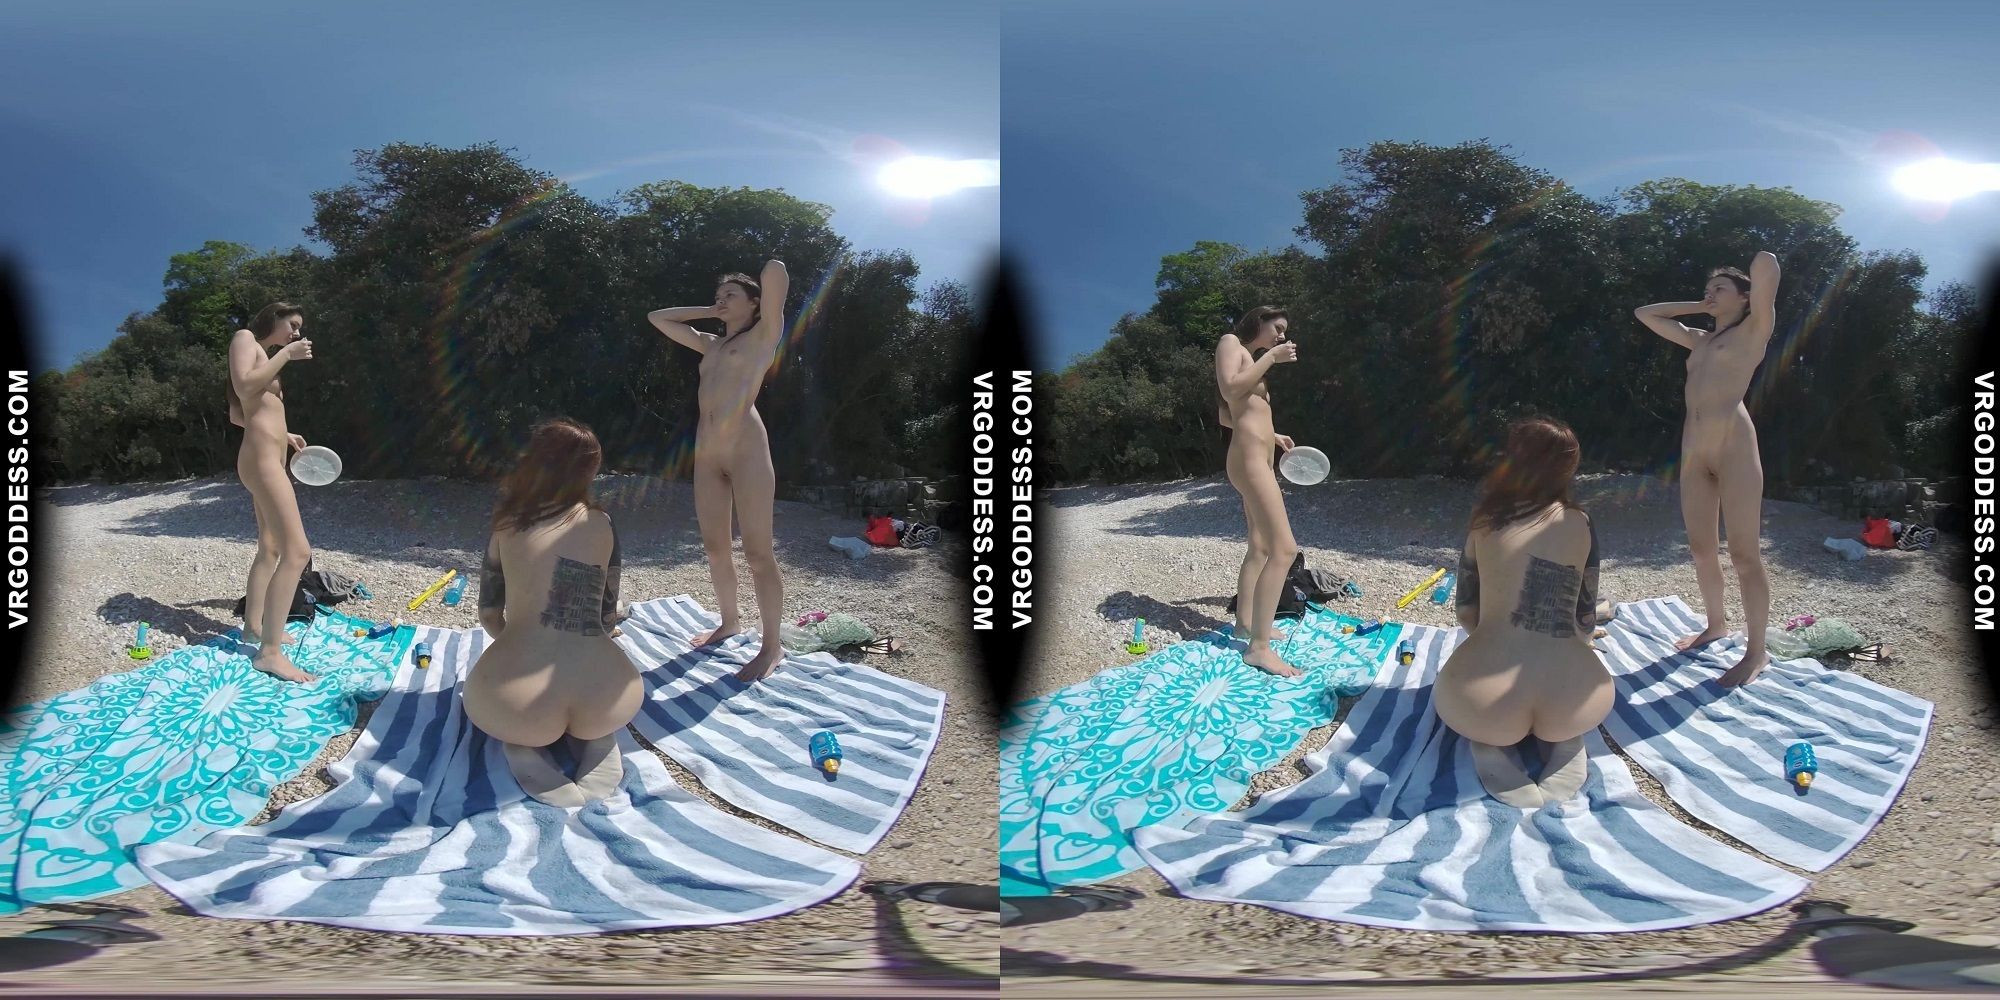 3 Babes Naked On Vacation Beach Picnic Playing Frisbee Searching For Shells... Slideshow